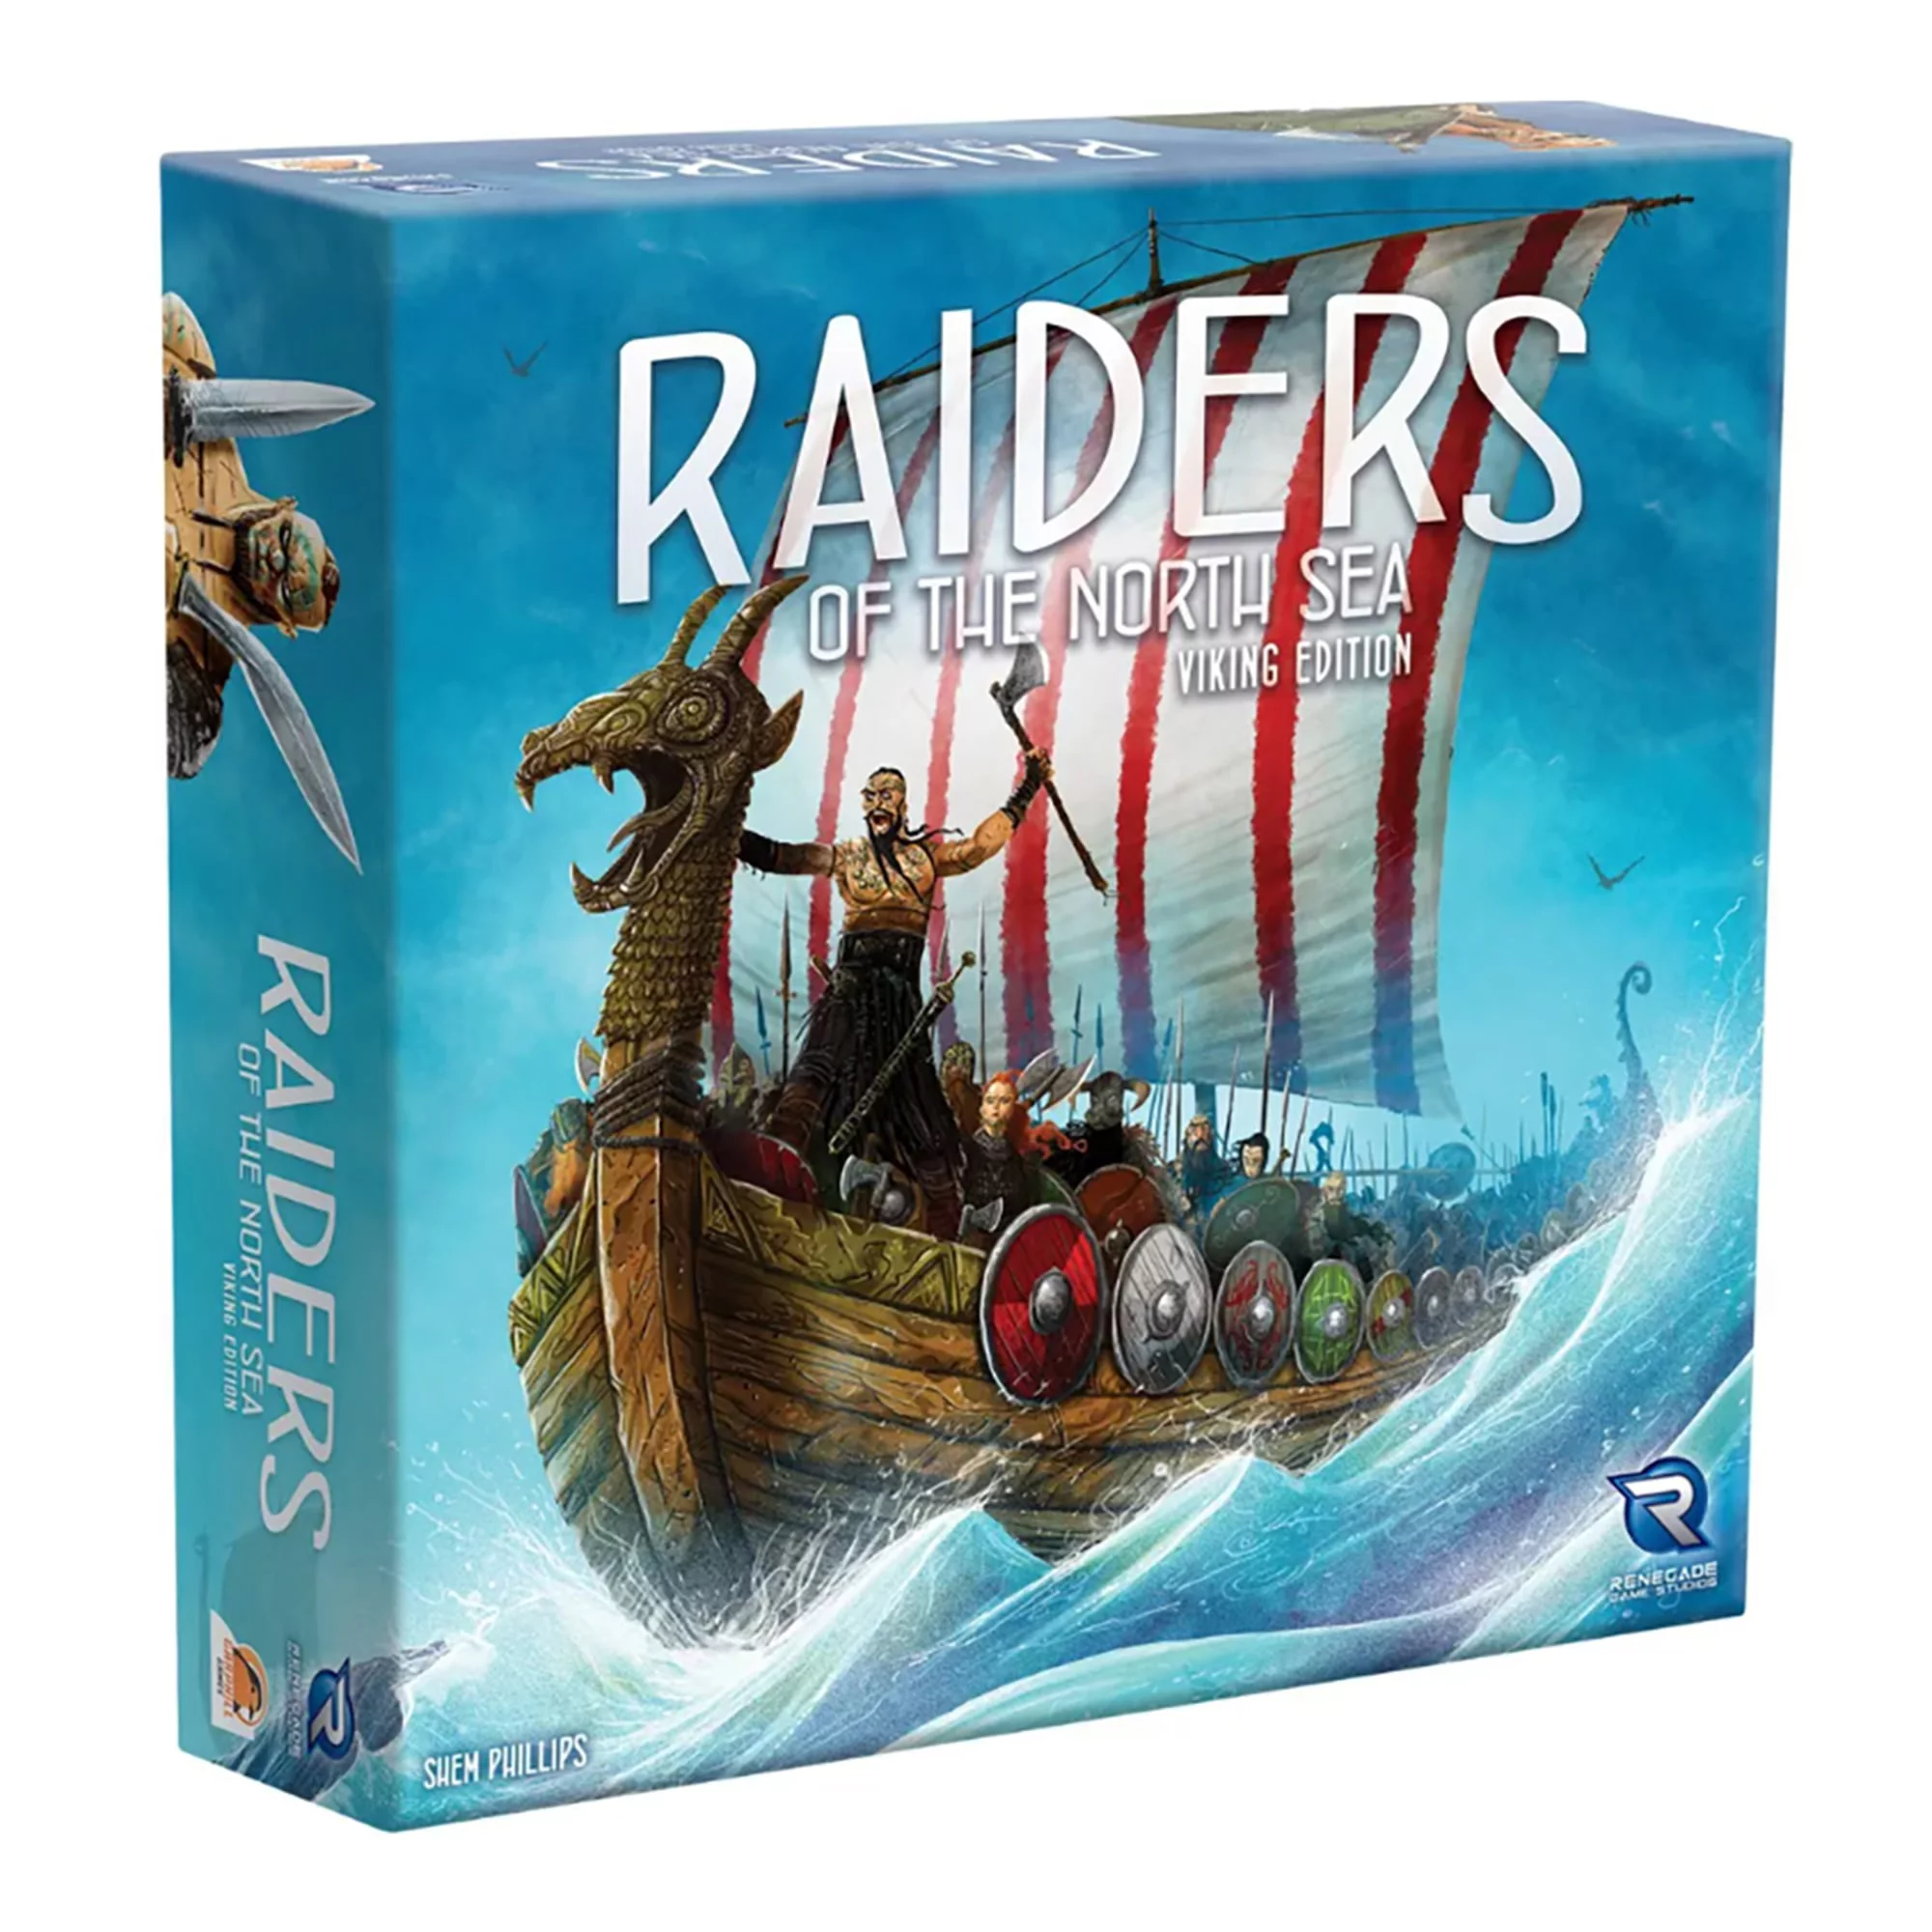 Raiders of the North Sea review